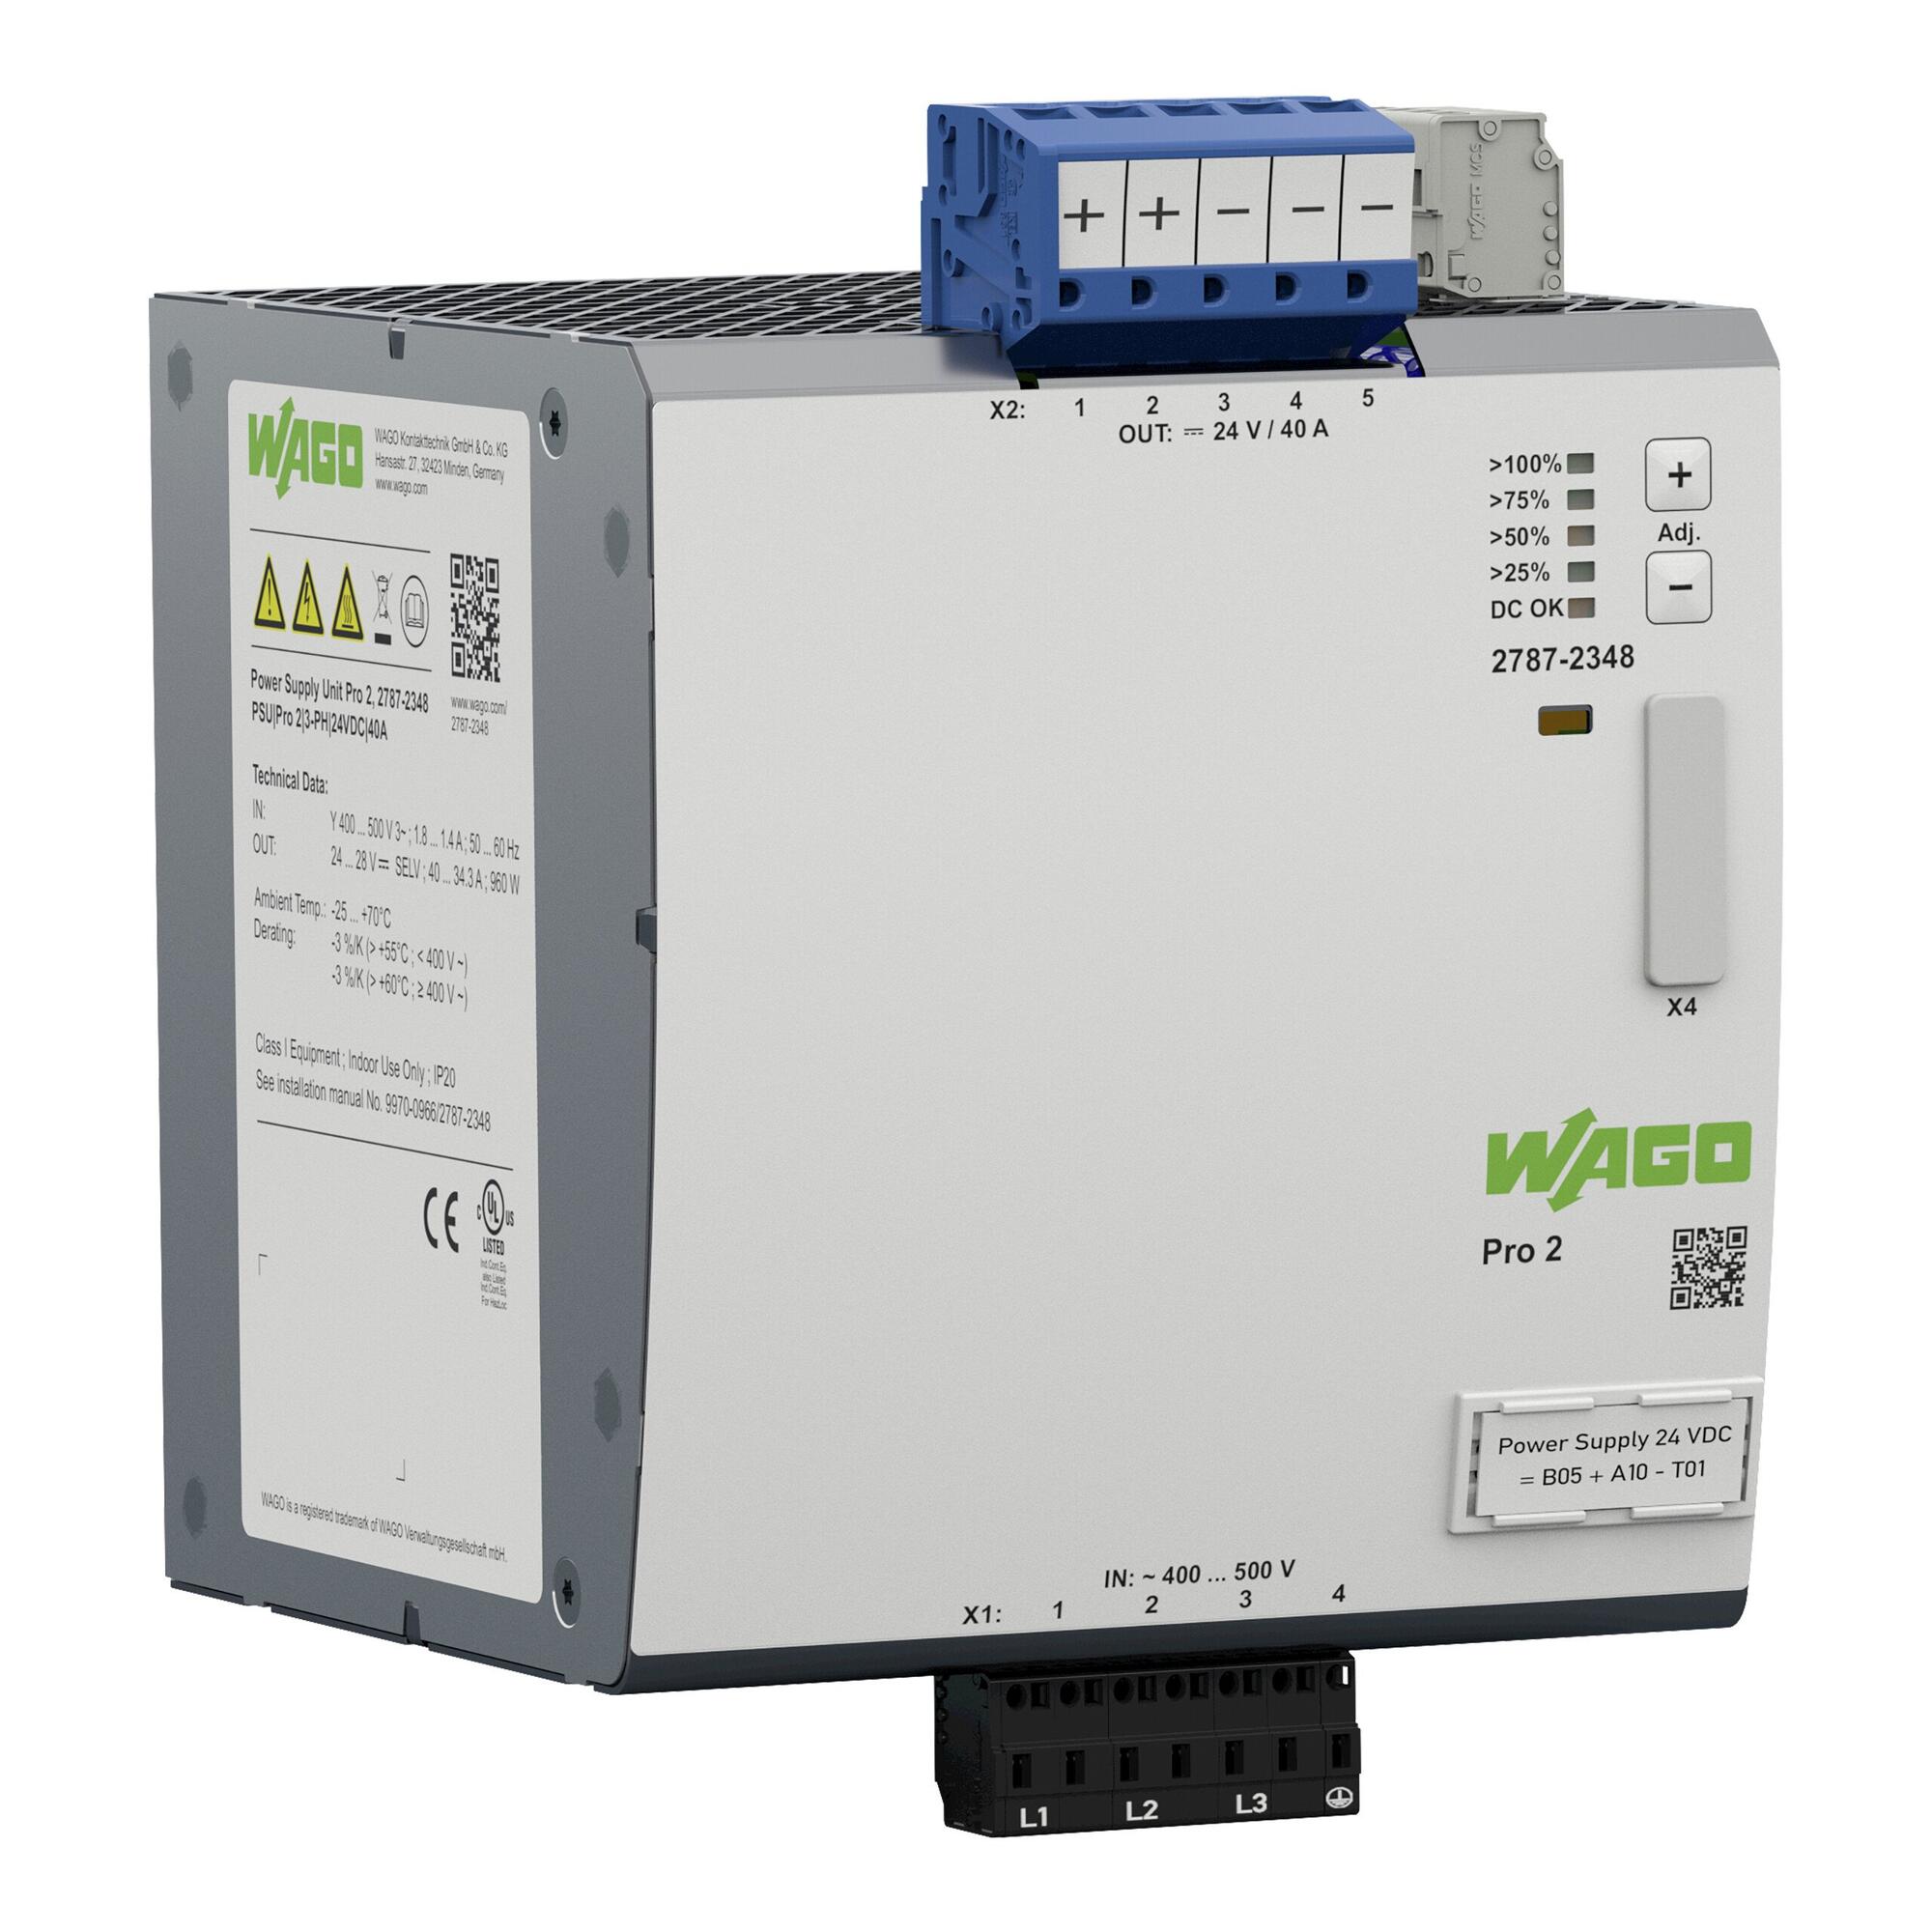 Power supply; Pro 2; 3-phase; 24 VDC output voltage; 40 A output current; TopBoost + PowerBoost; communication capability